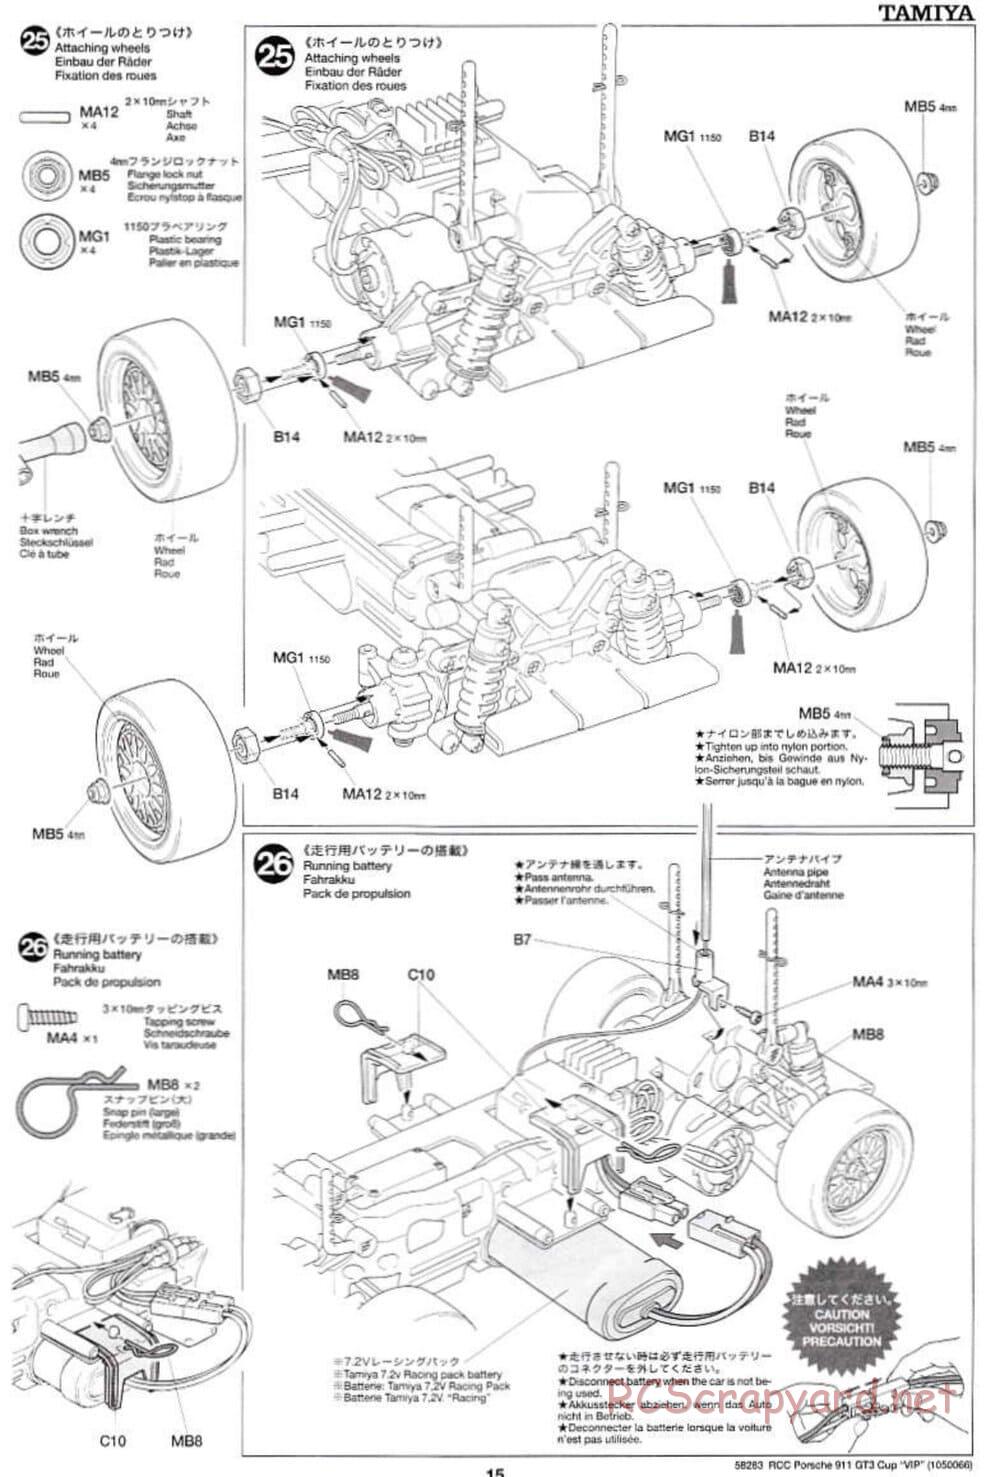 Tamiya - Porsche 911 GT3 Cup VIP - TL-01 Chassis - Manual - Page 15